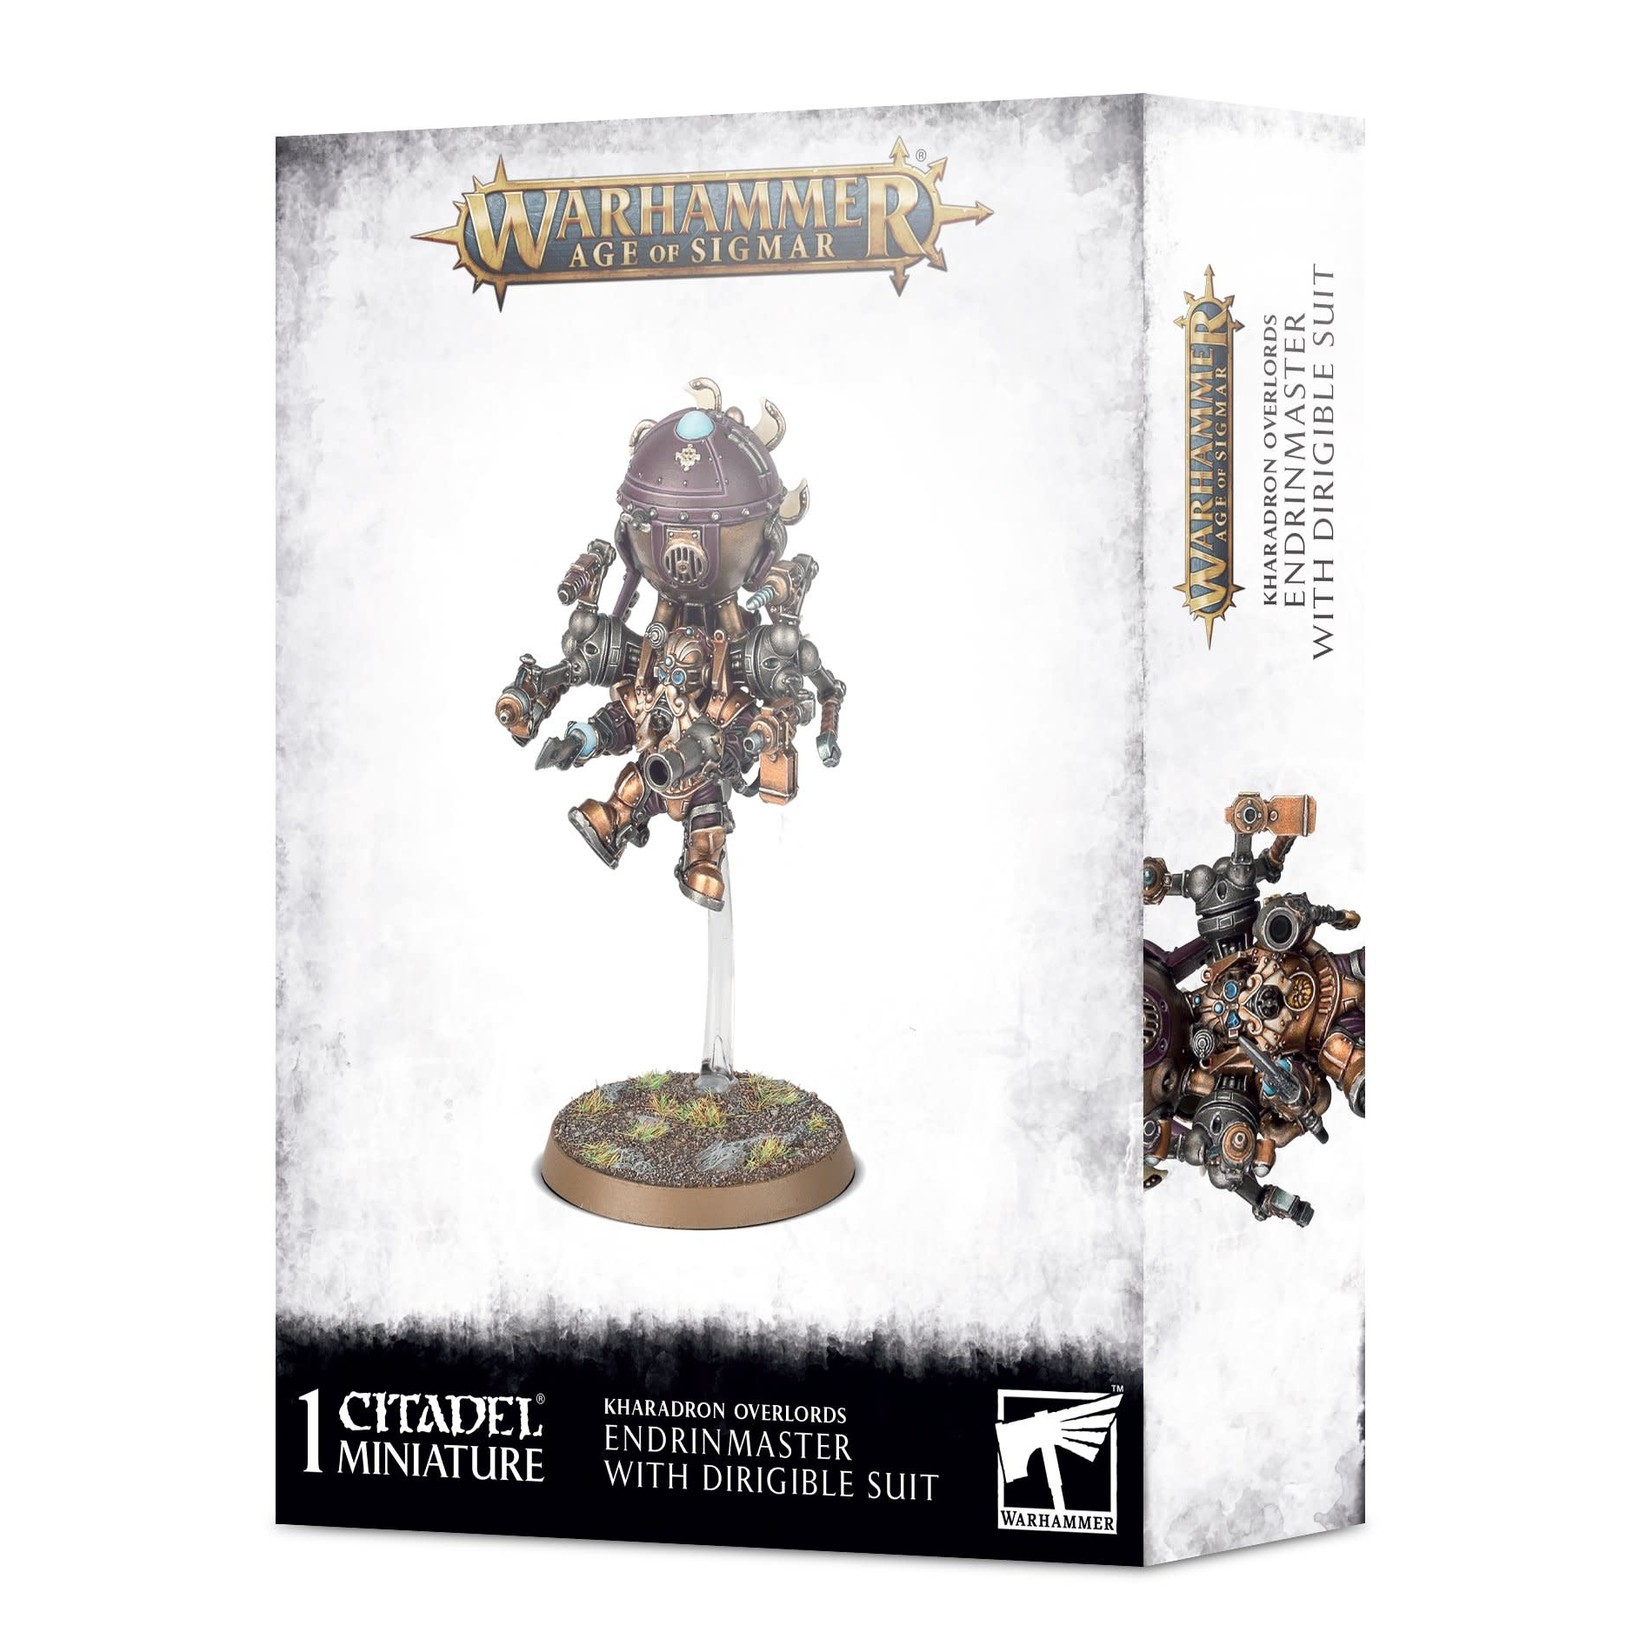 Games Workshop Kharadron Overlords Endrinmaster in Dirigible Suit